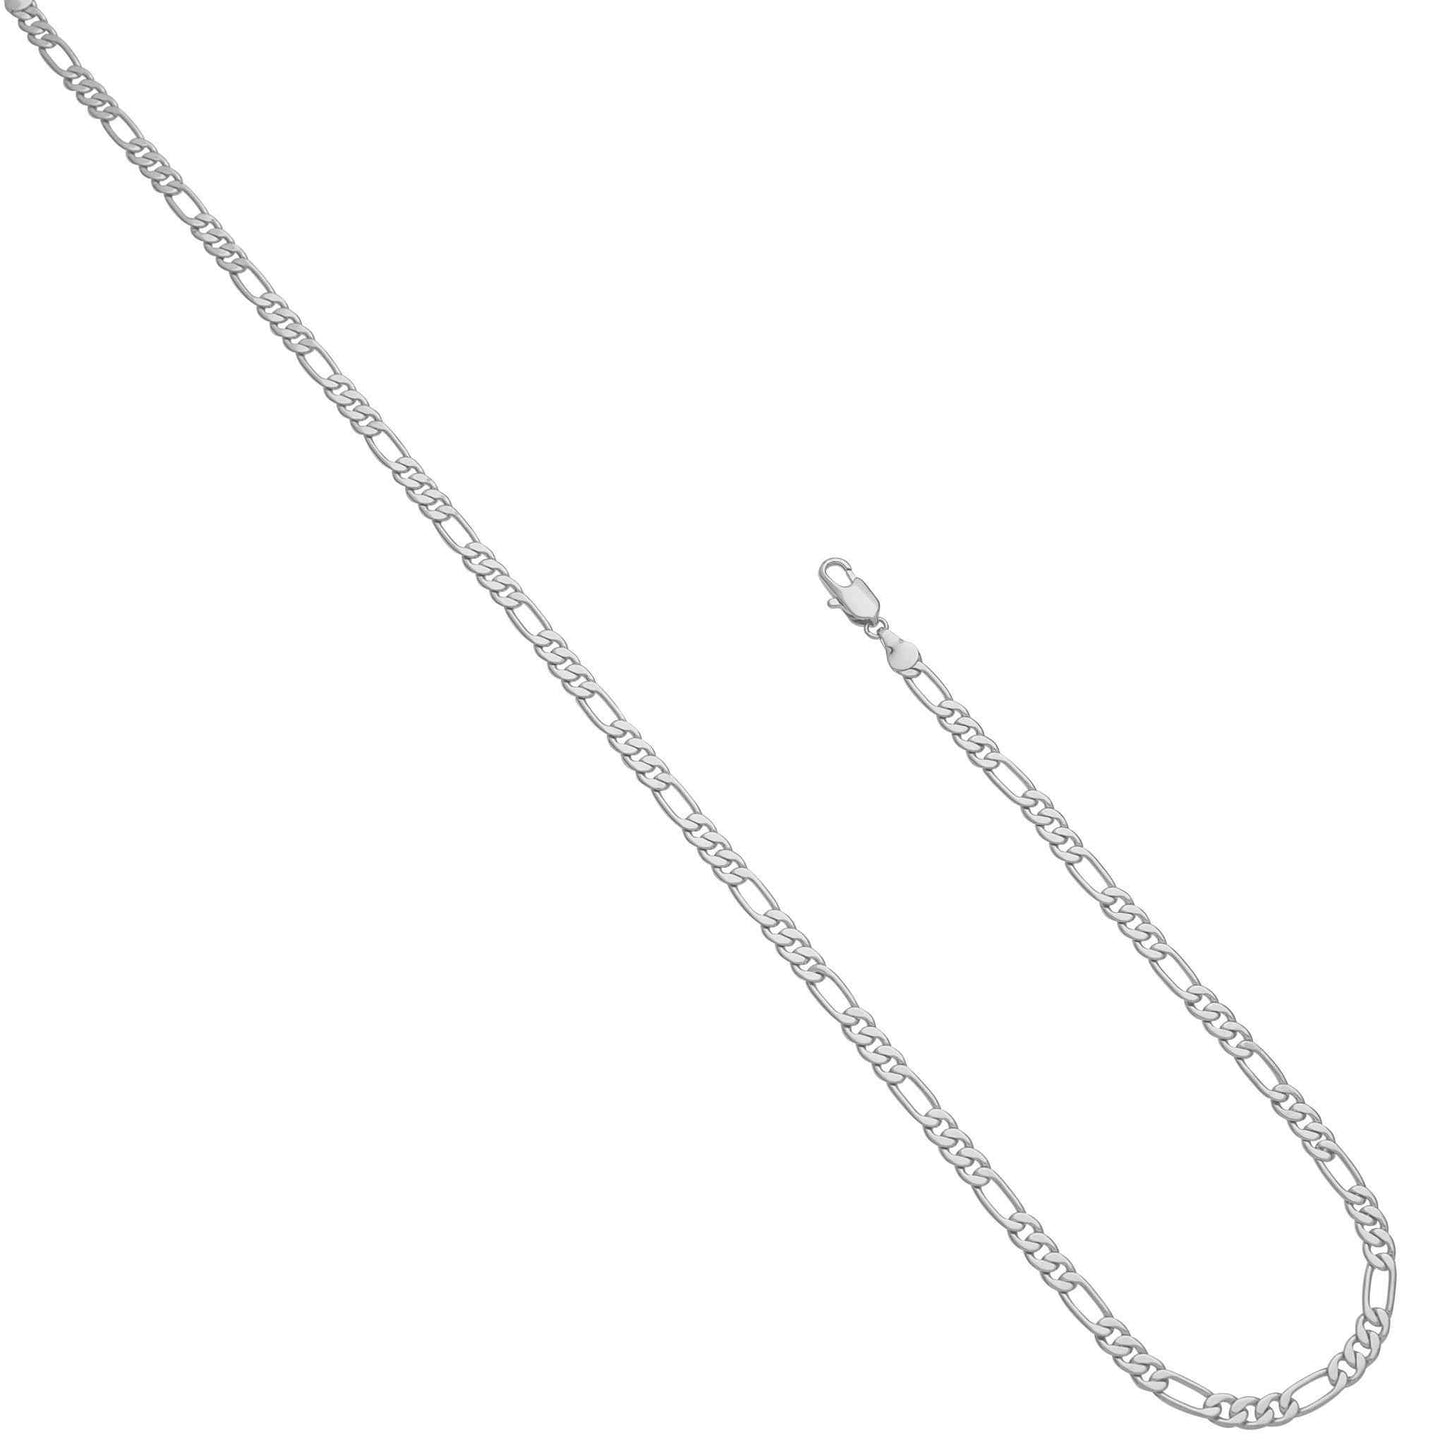 A 18" 5mm smooth figaro chain displayed on a neutral white background.